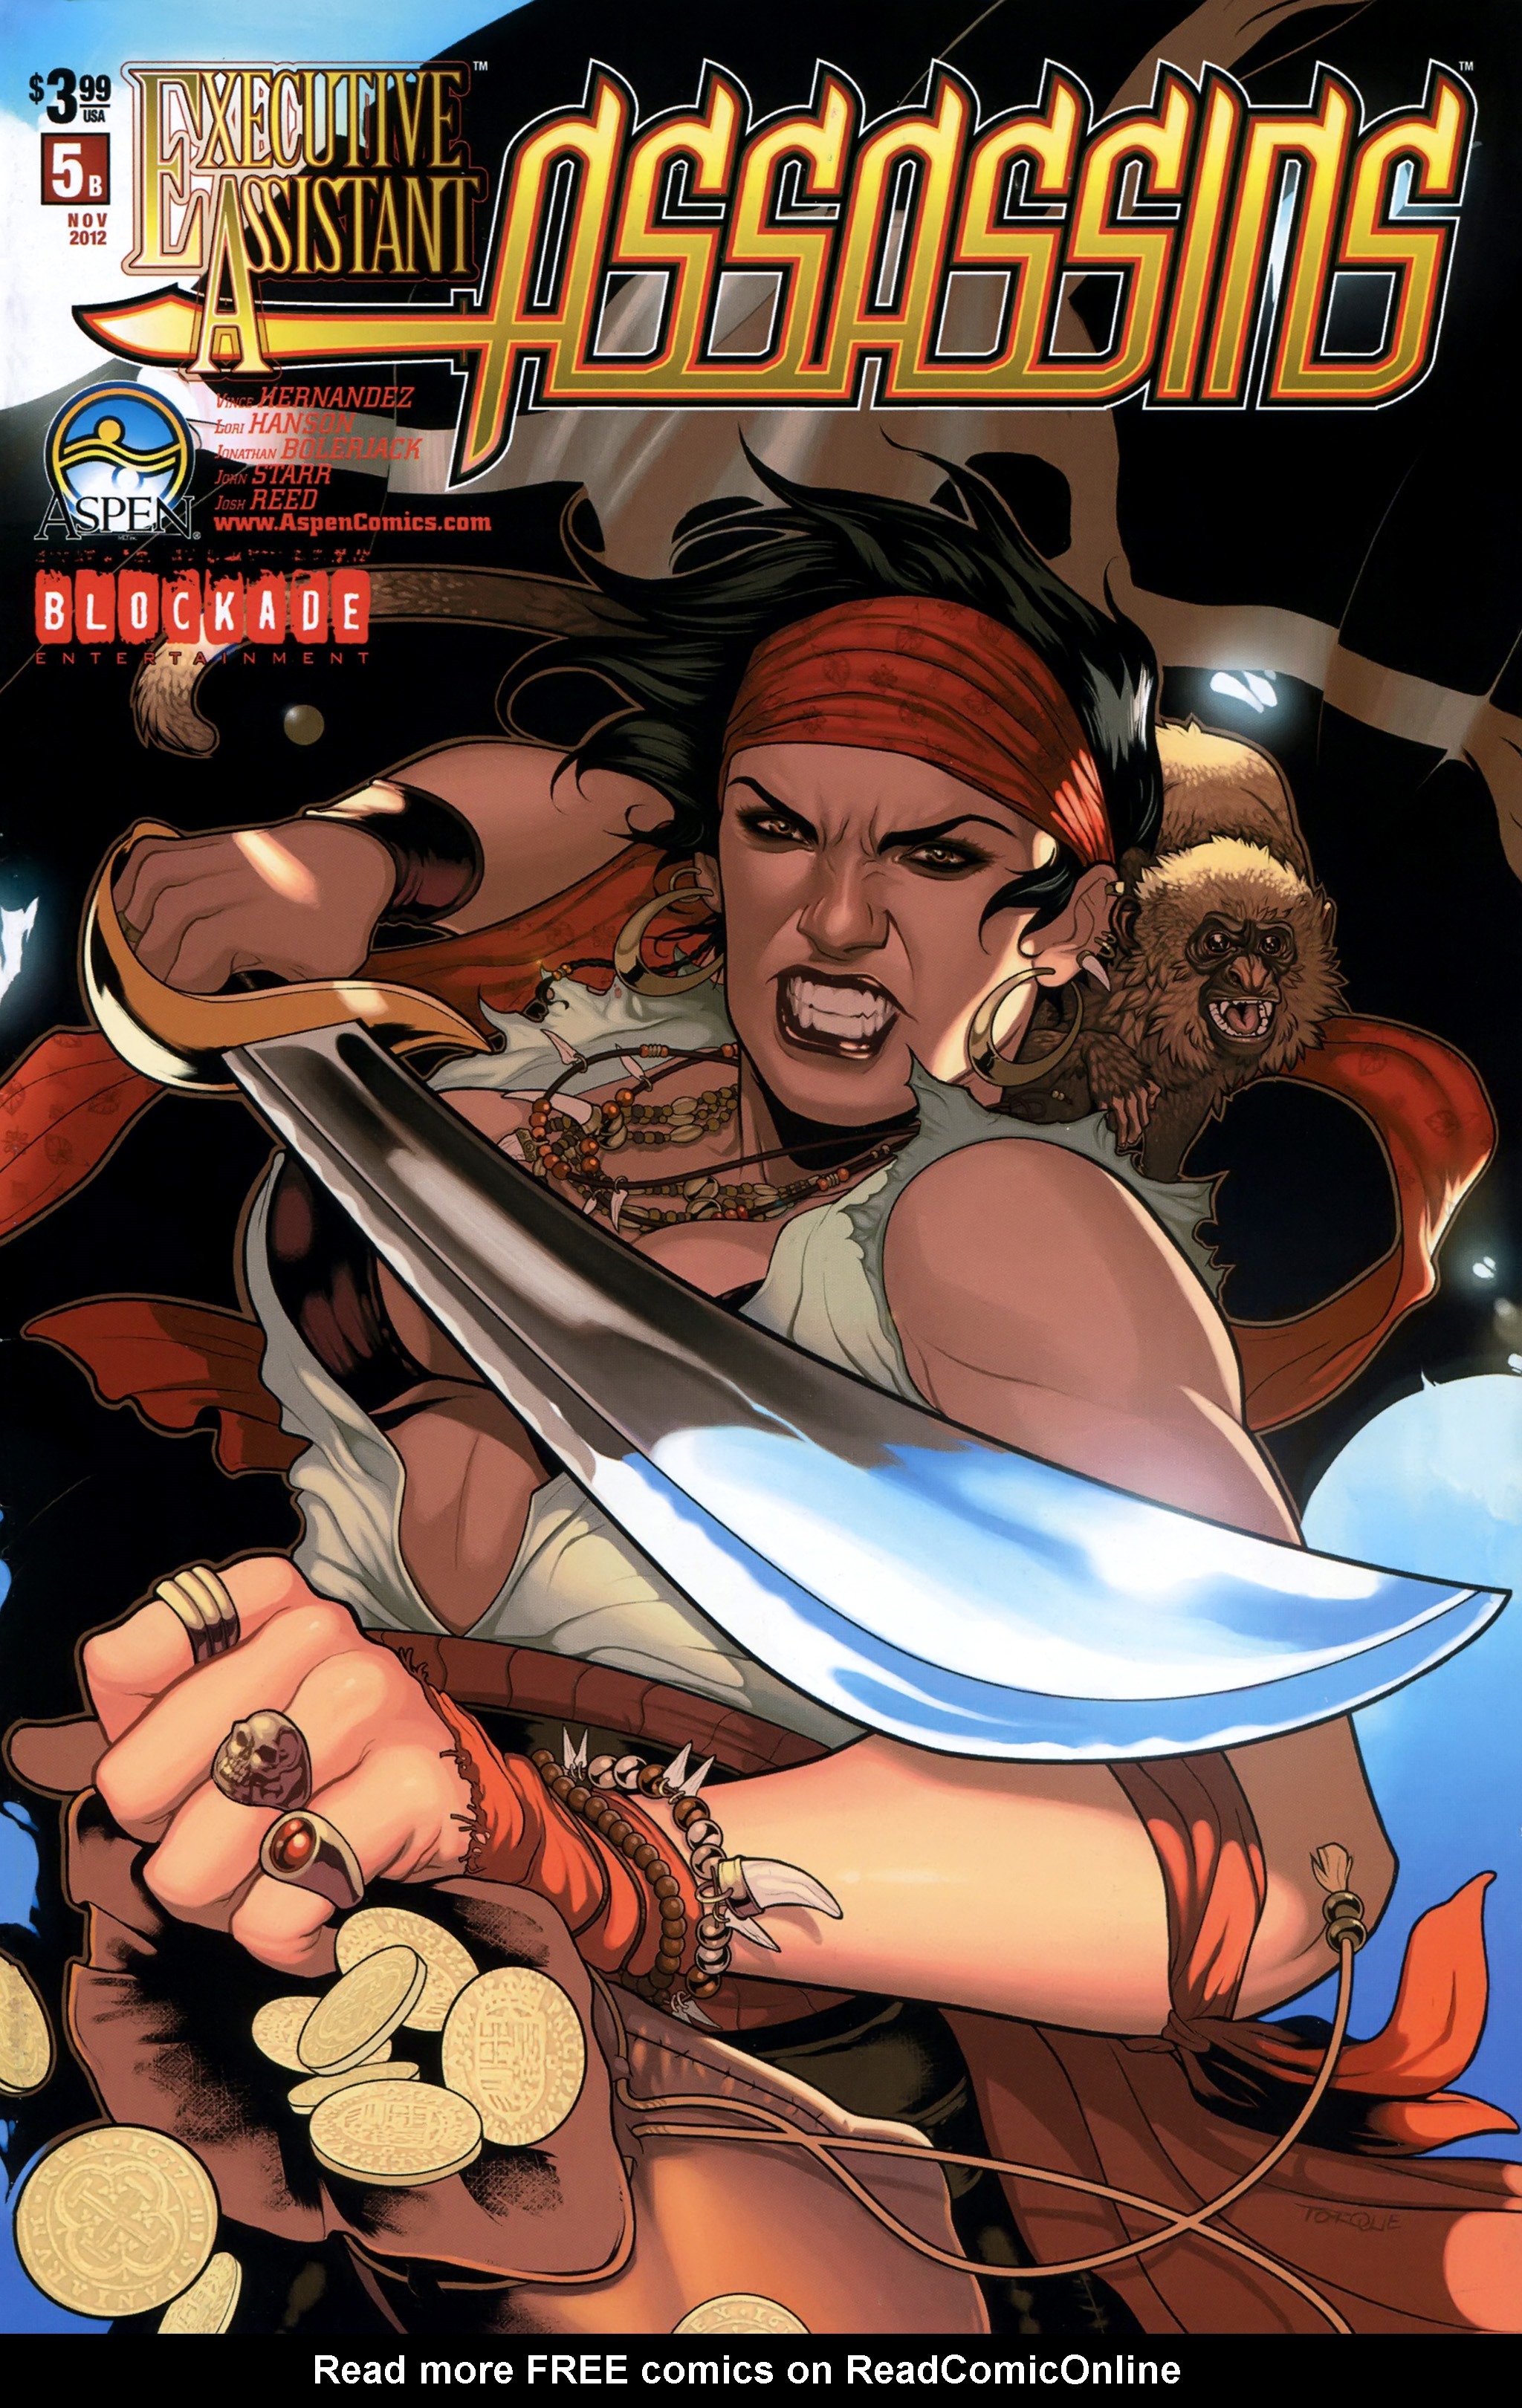 Read online Executive Assistant: Assassins comic -  Issue #5 - 2